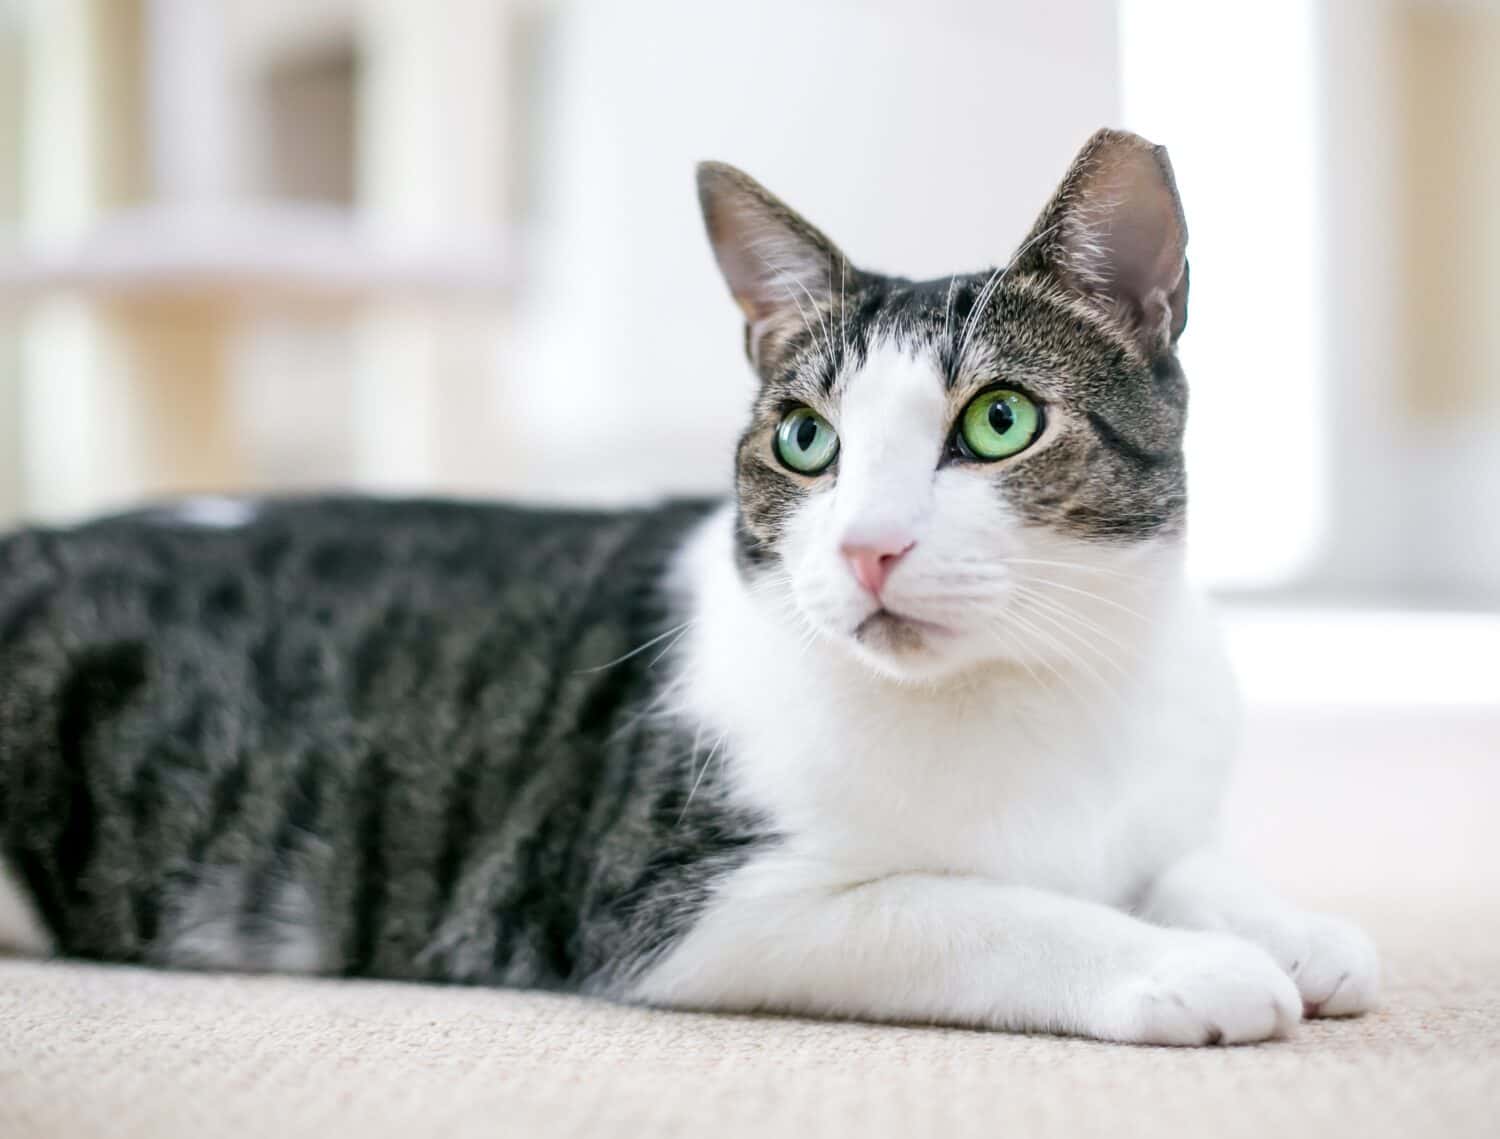 A shorthair cat with green eyes and its left ear tipped lying down in a relaxed pose